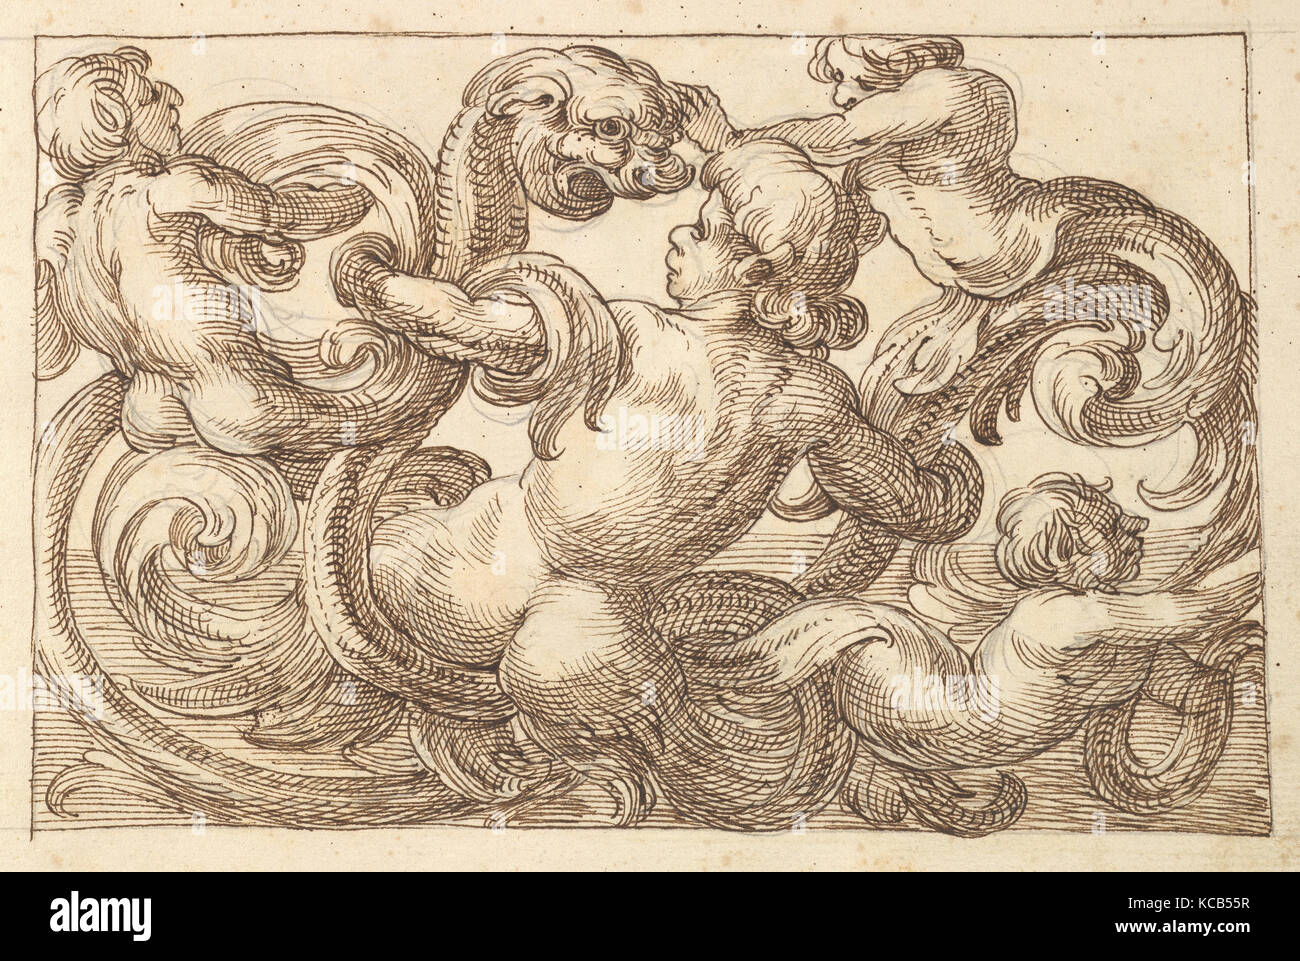 Horizontal Panel Design with Four Hybrid Male Figures and a Fantastical Creature Interspersed between Acanthus Rinceaux Stock Photo